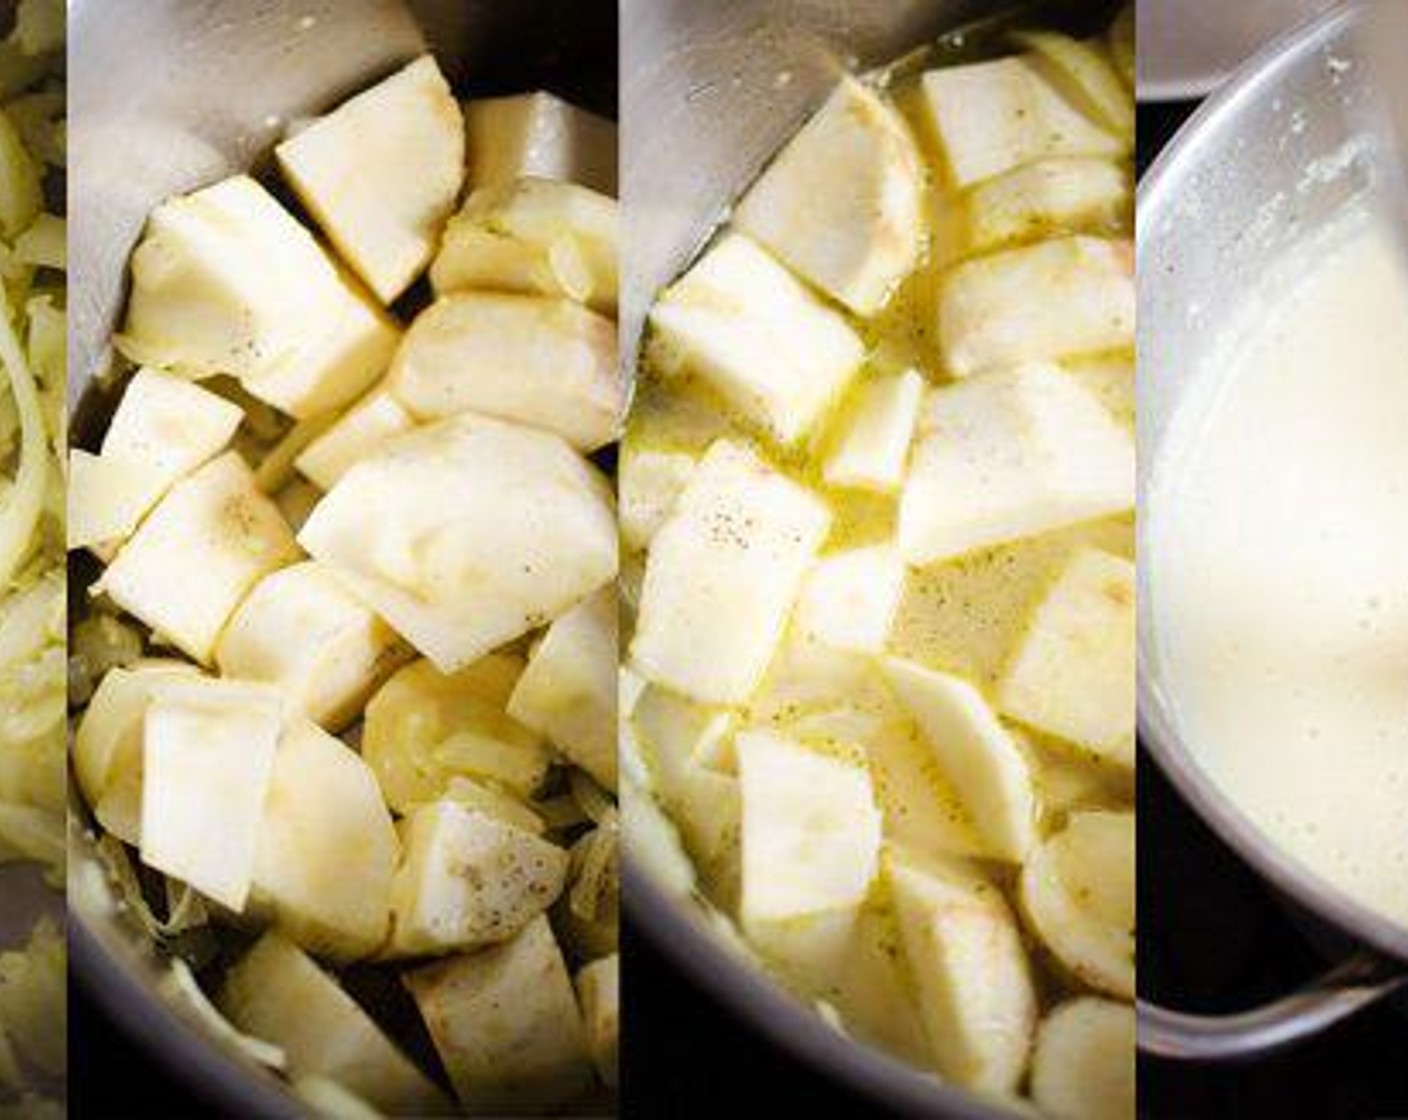 step 1 Bring Olive Oil (2 Tbsp) to medium heat in a large pot. Add White Onion (1/2 cup) and Garlic (2 cloves) then cook gently for ten minutes, until onions are soft. Add Salt (1/4 tsp), Ground Black Pepper (1/4 tsp) and Parsnips (2) to the pot. Stir to coat, then add Milk (1 cup) and Vegetable Stock (2 cups). Bring mixture to a slow simmer and simmer 25 to 30 minutes, until parsnip is fork-tender.